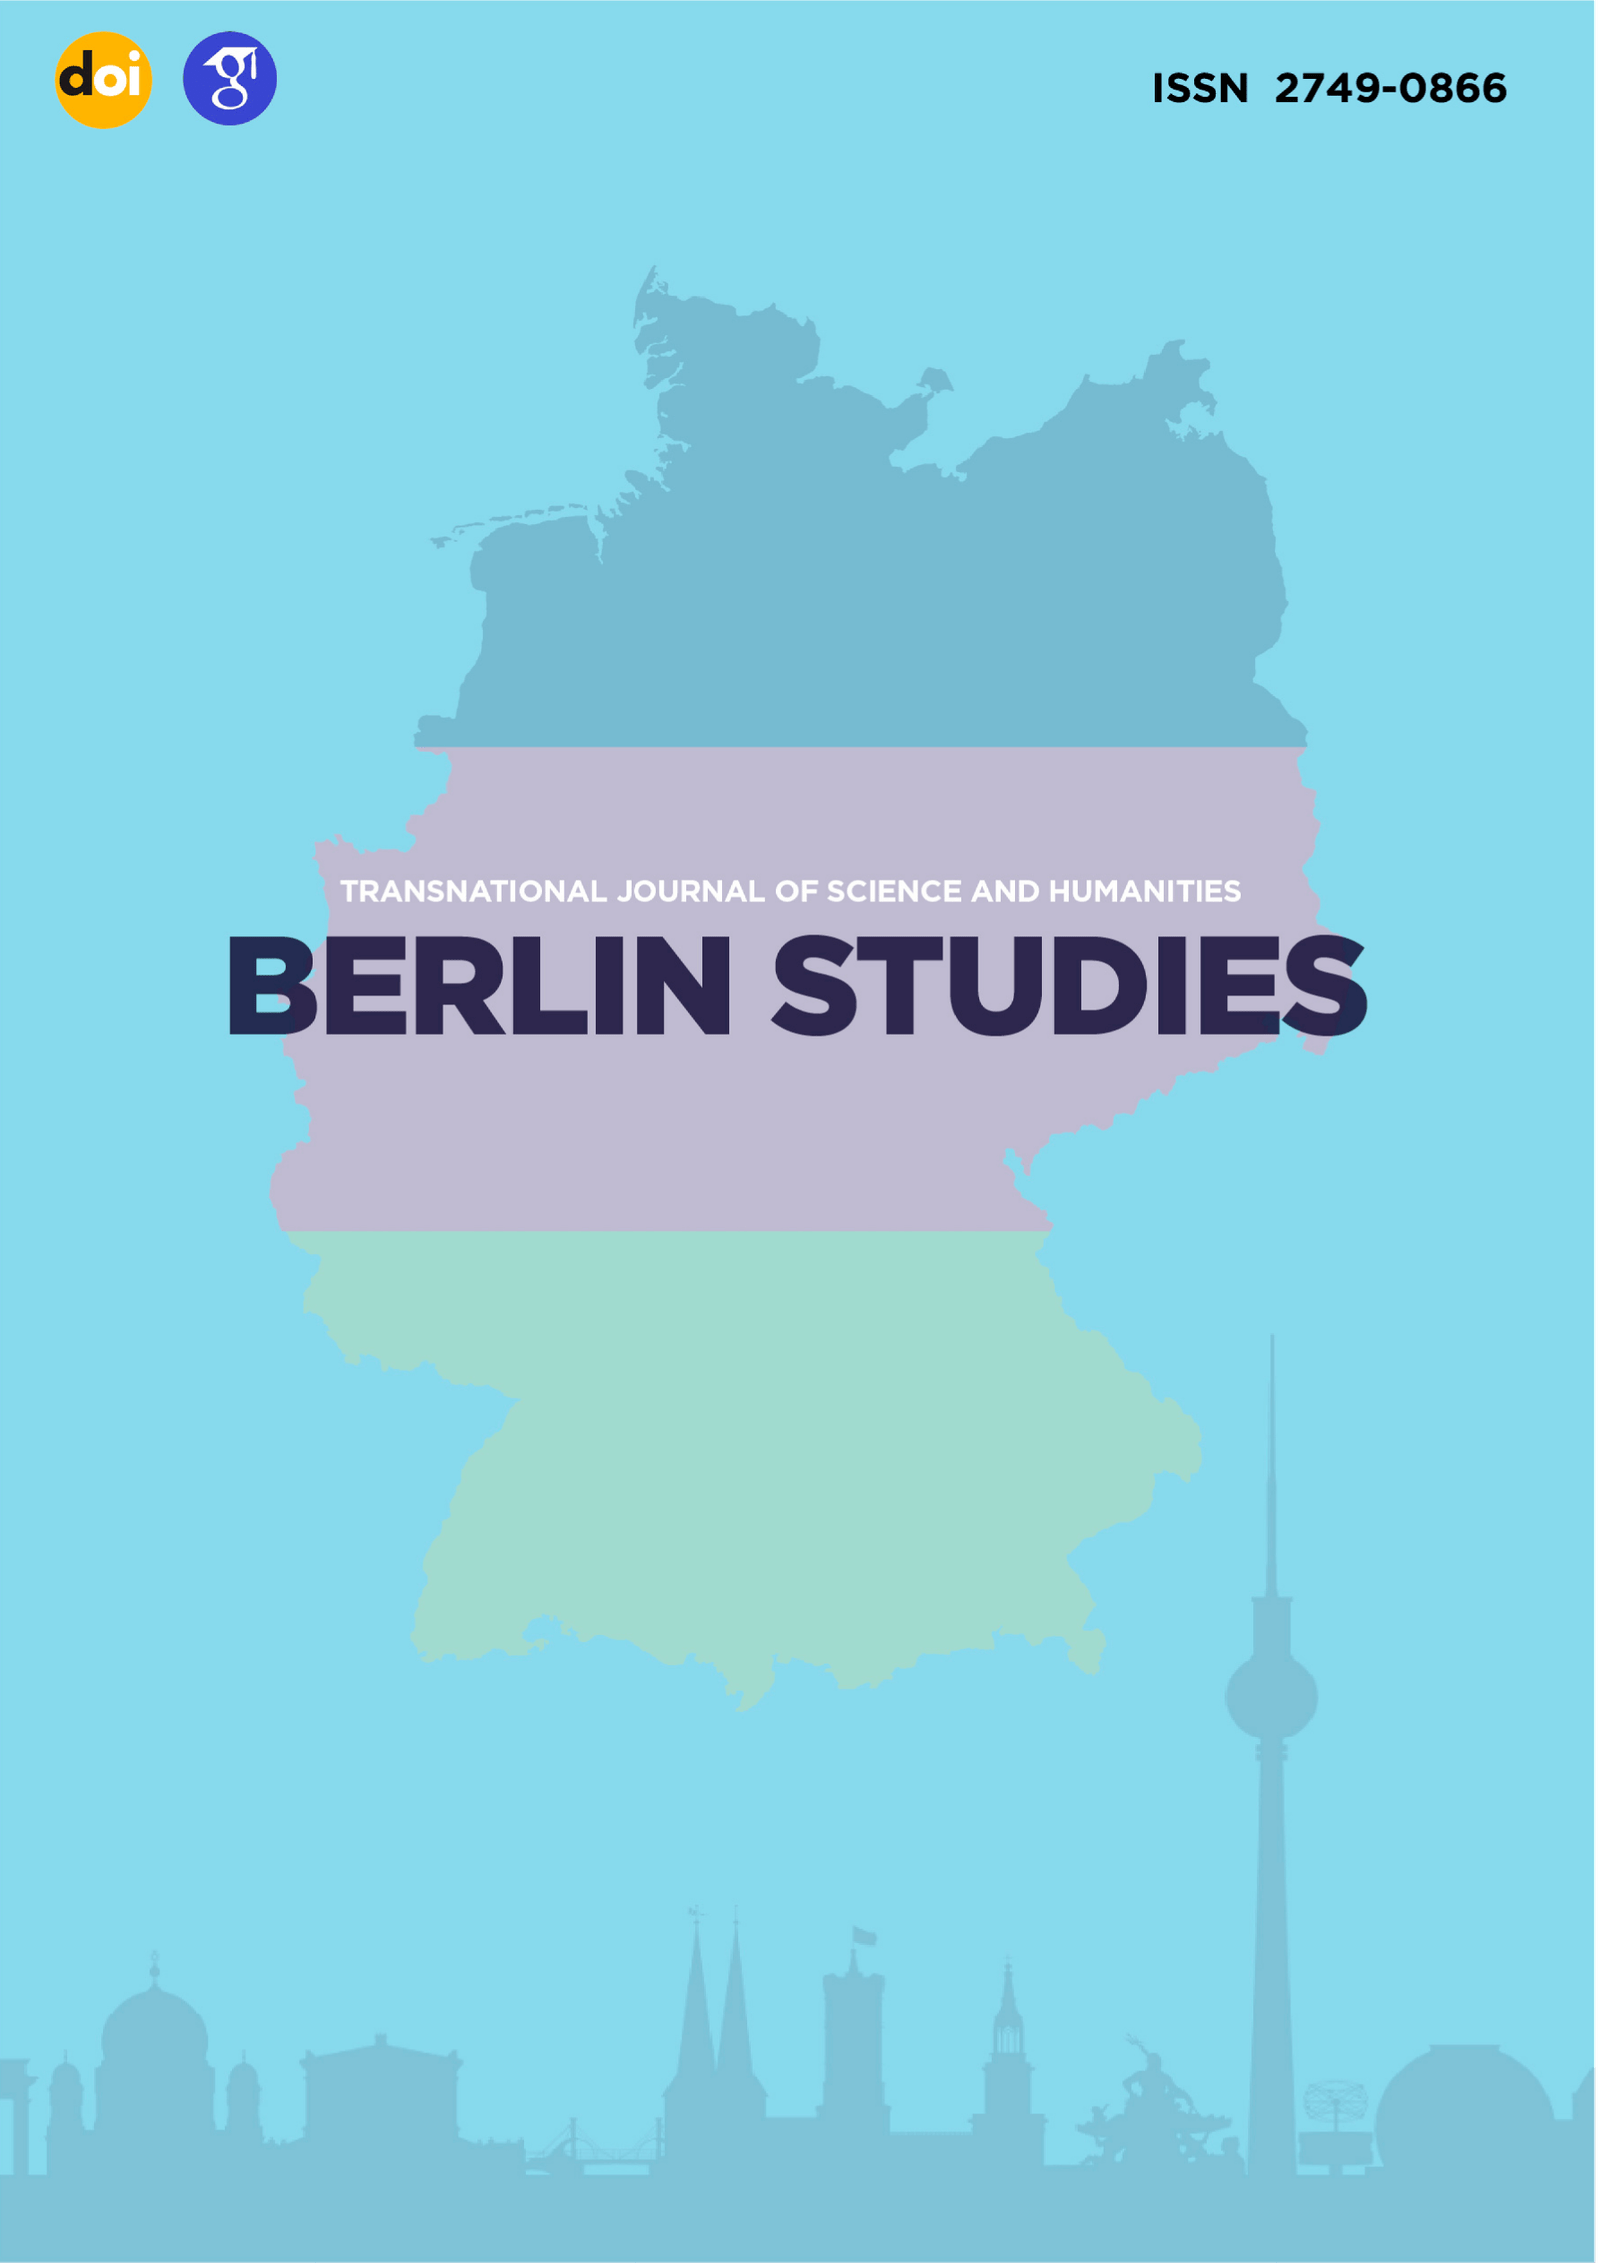 					View Vol. 2 No. 1.6 Philological sciences (2022): Berlin Studies Transnational Journal of Science and Humanities
				